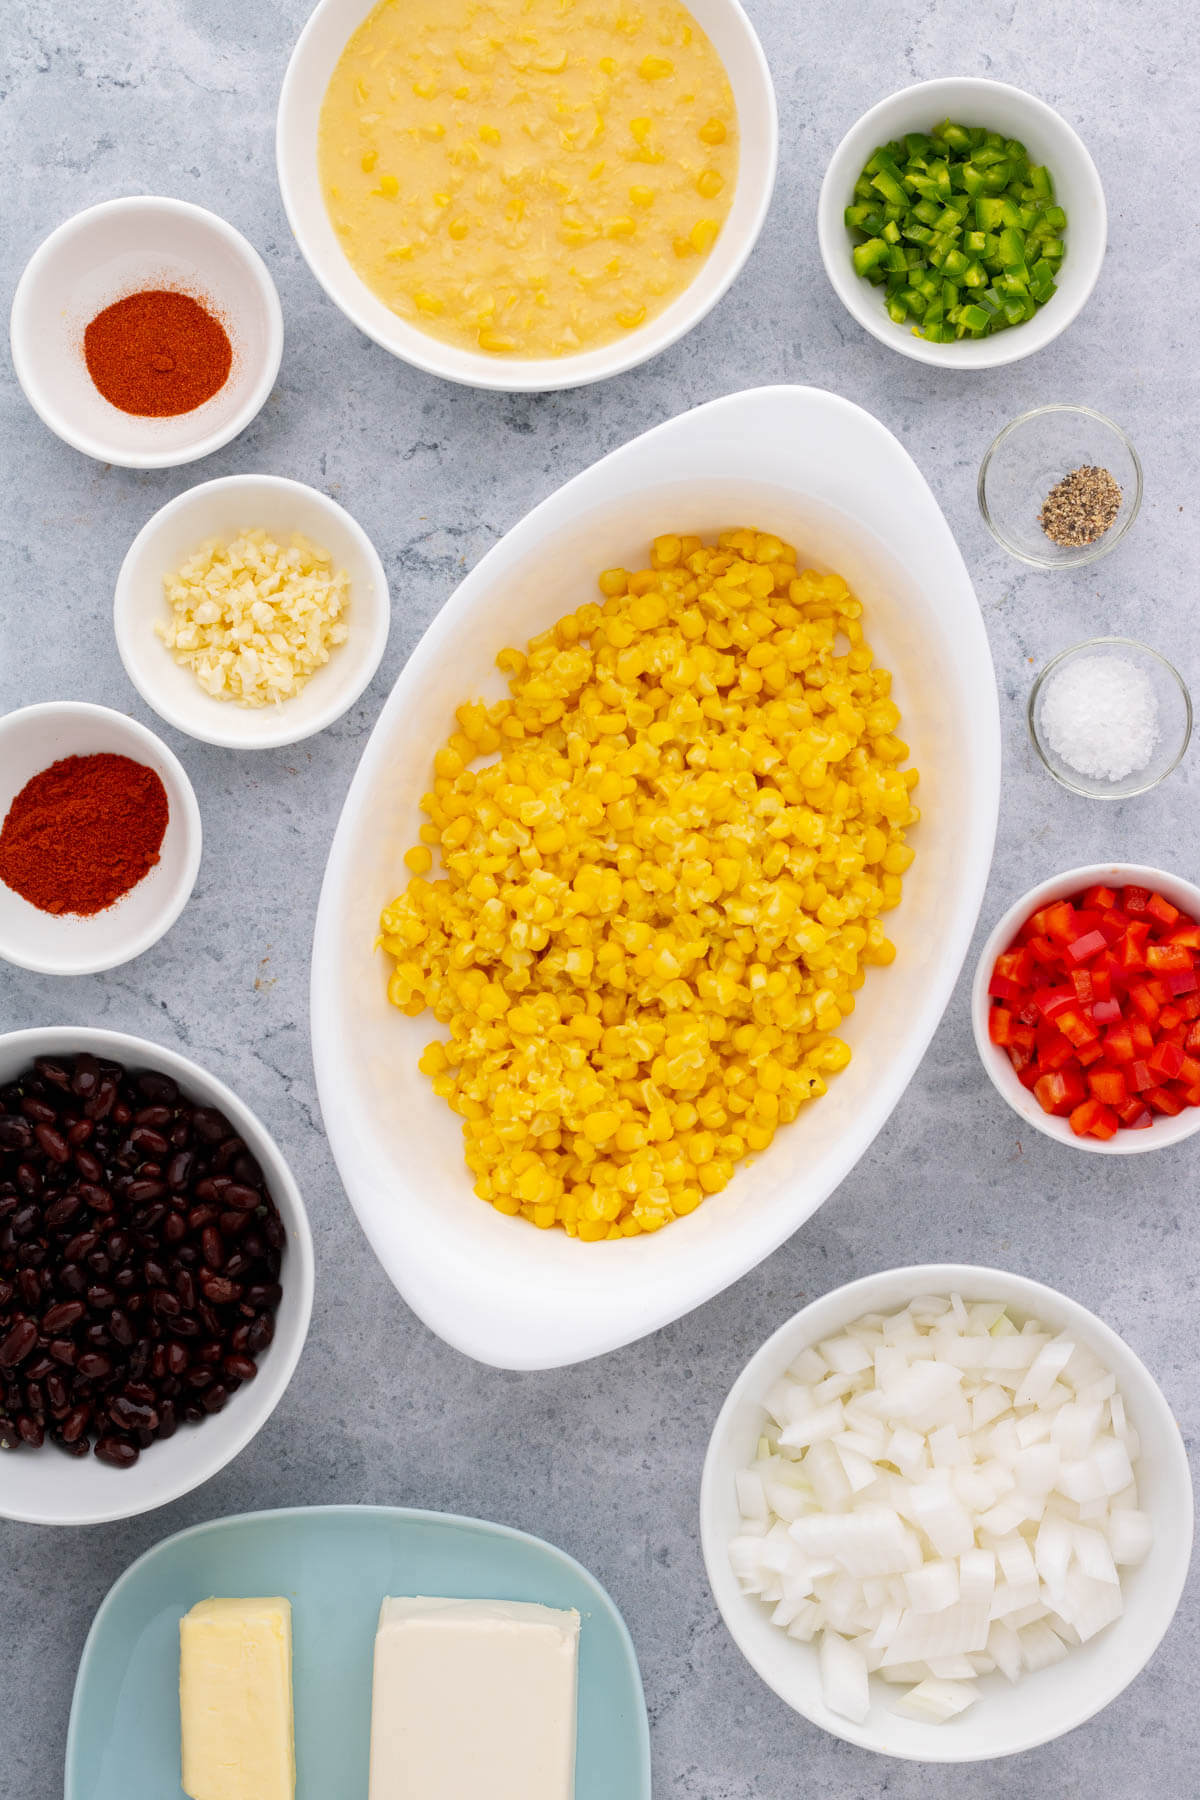 All the ingredients used in making creamy Tex Mex Corn Dip.